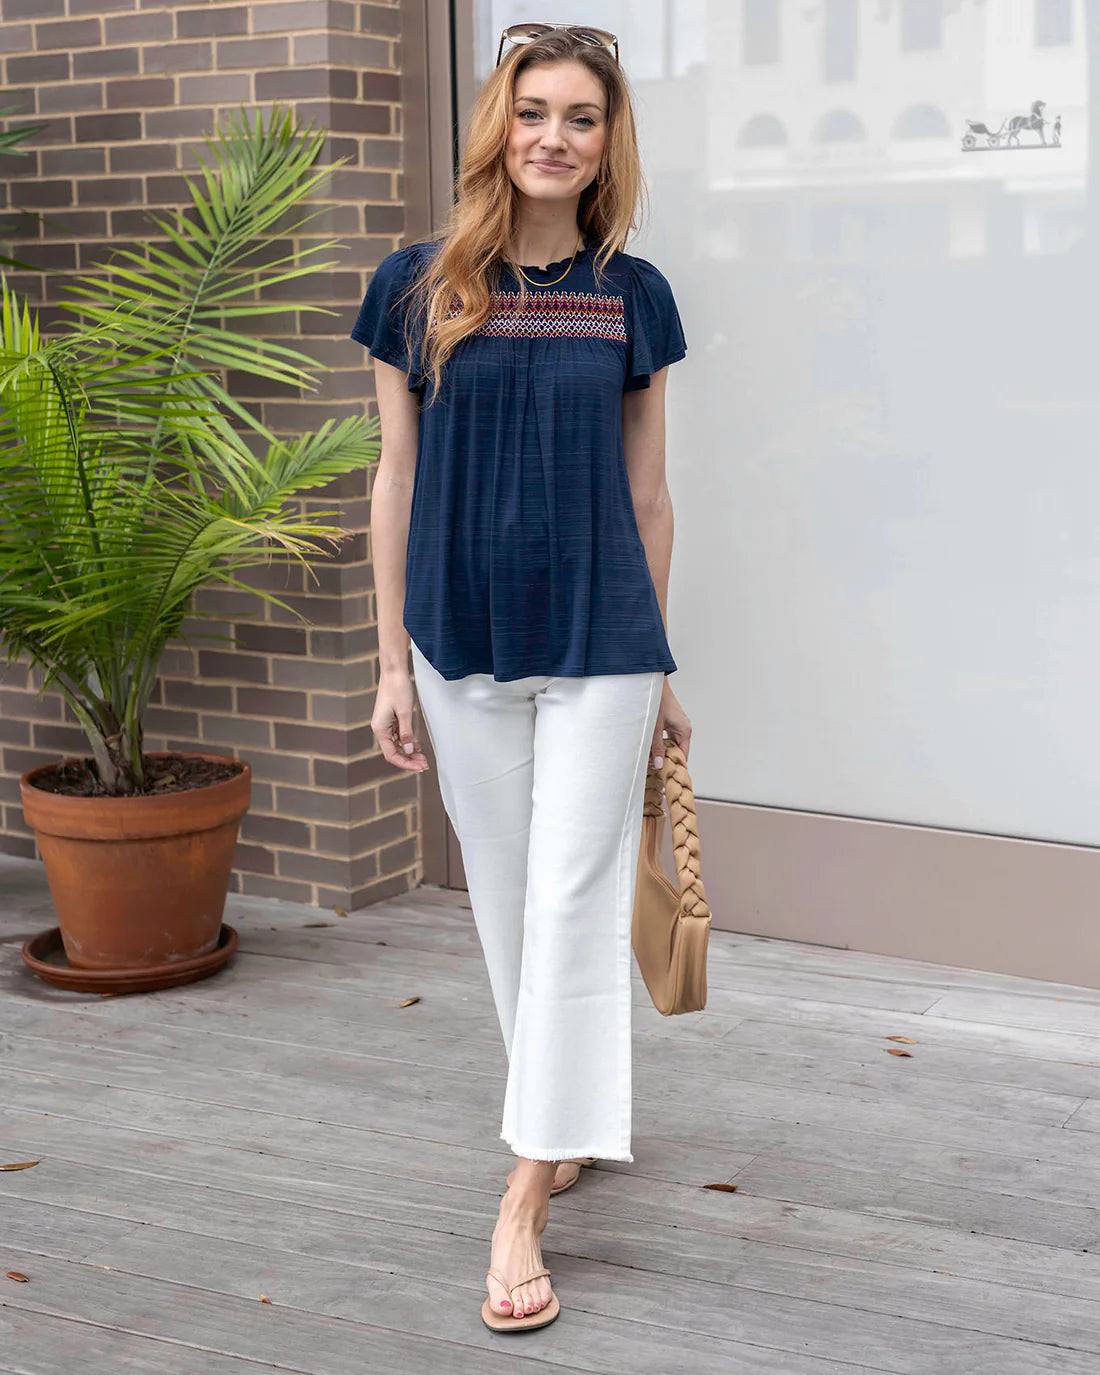 Grace and Lace Ellis Knit Navy Embroidered Top